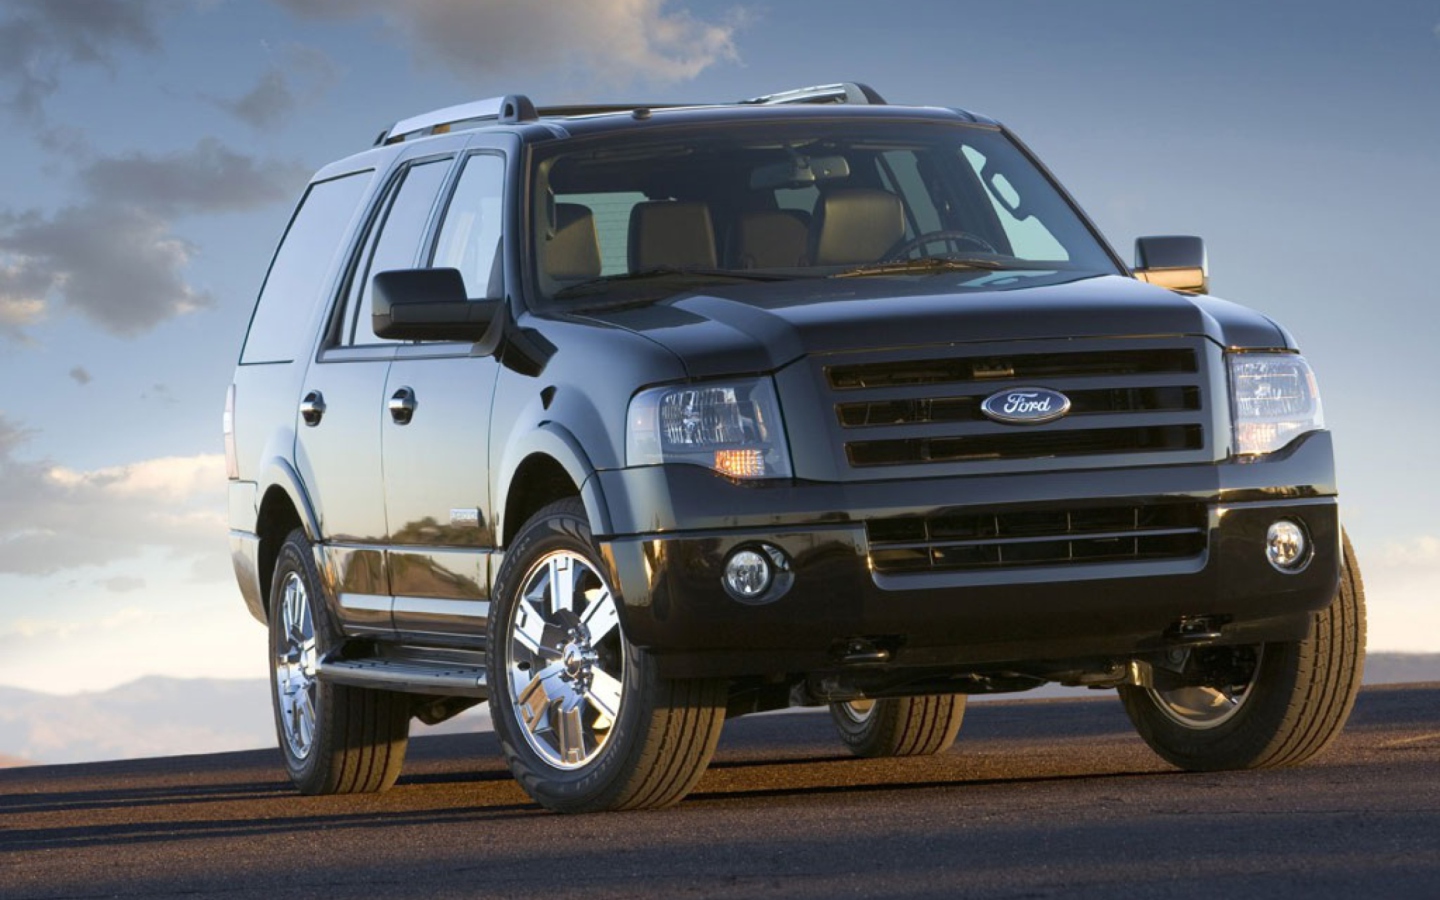 Ford Expedition wallpaper 1440x900